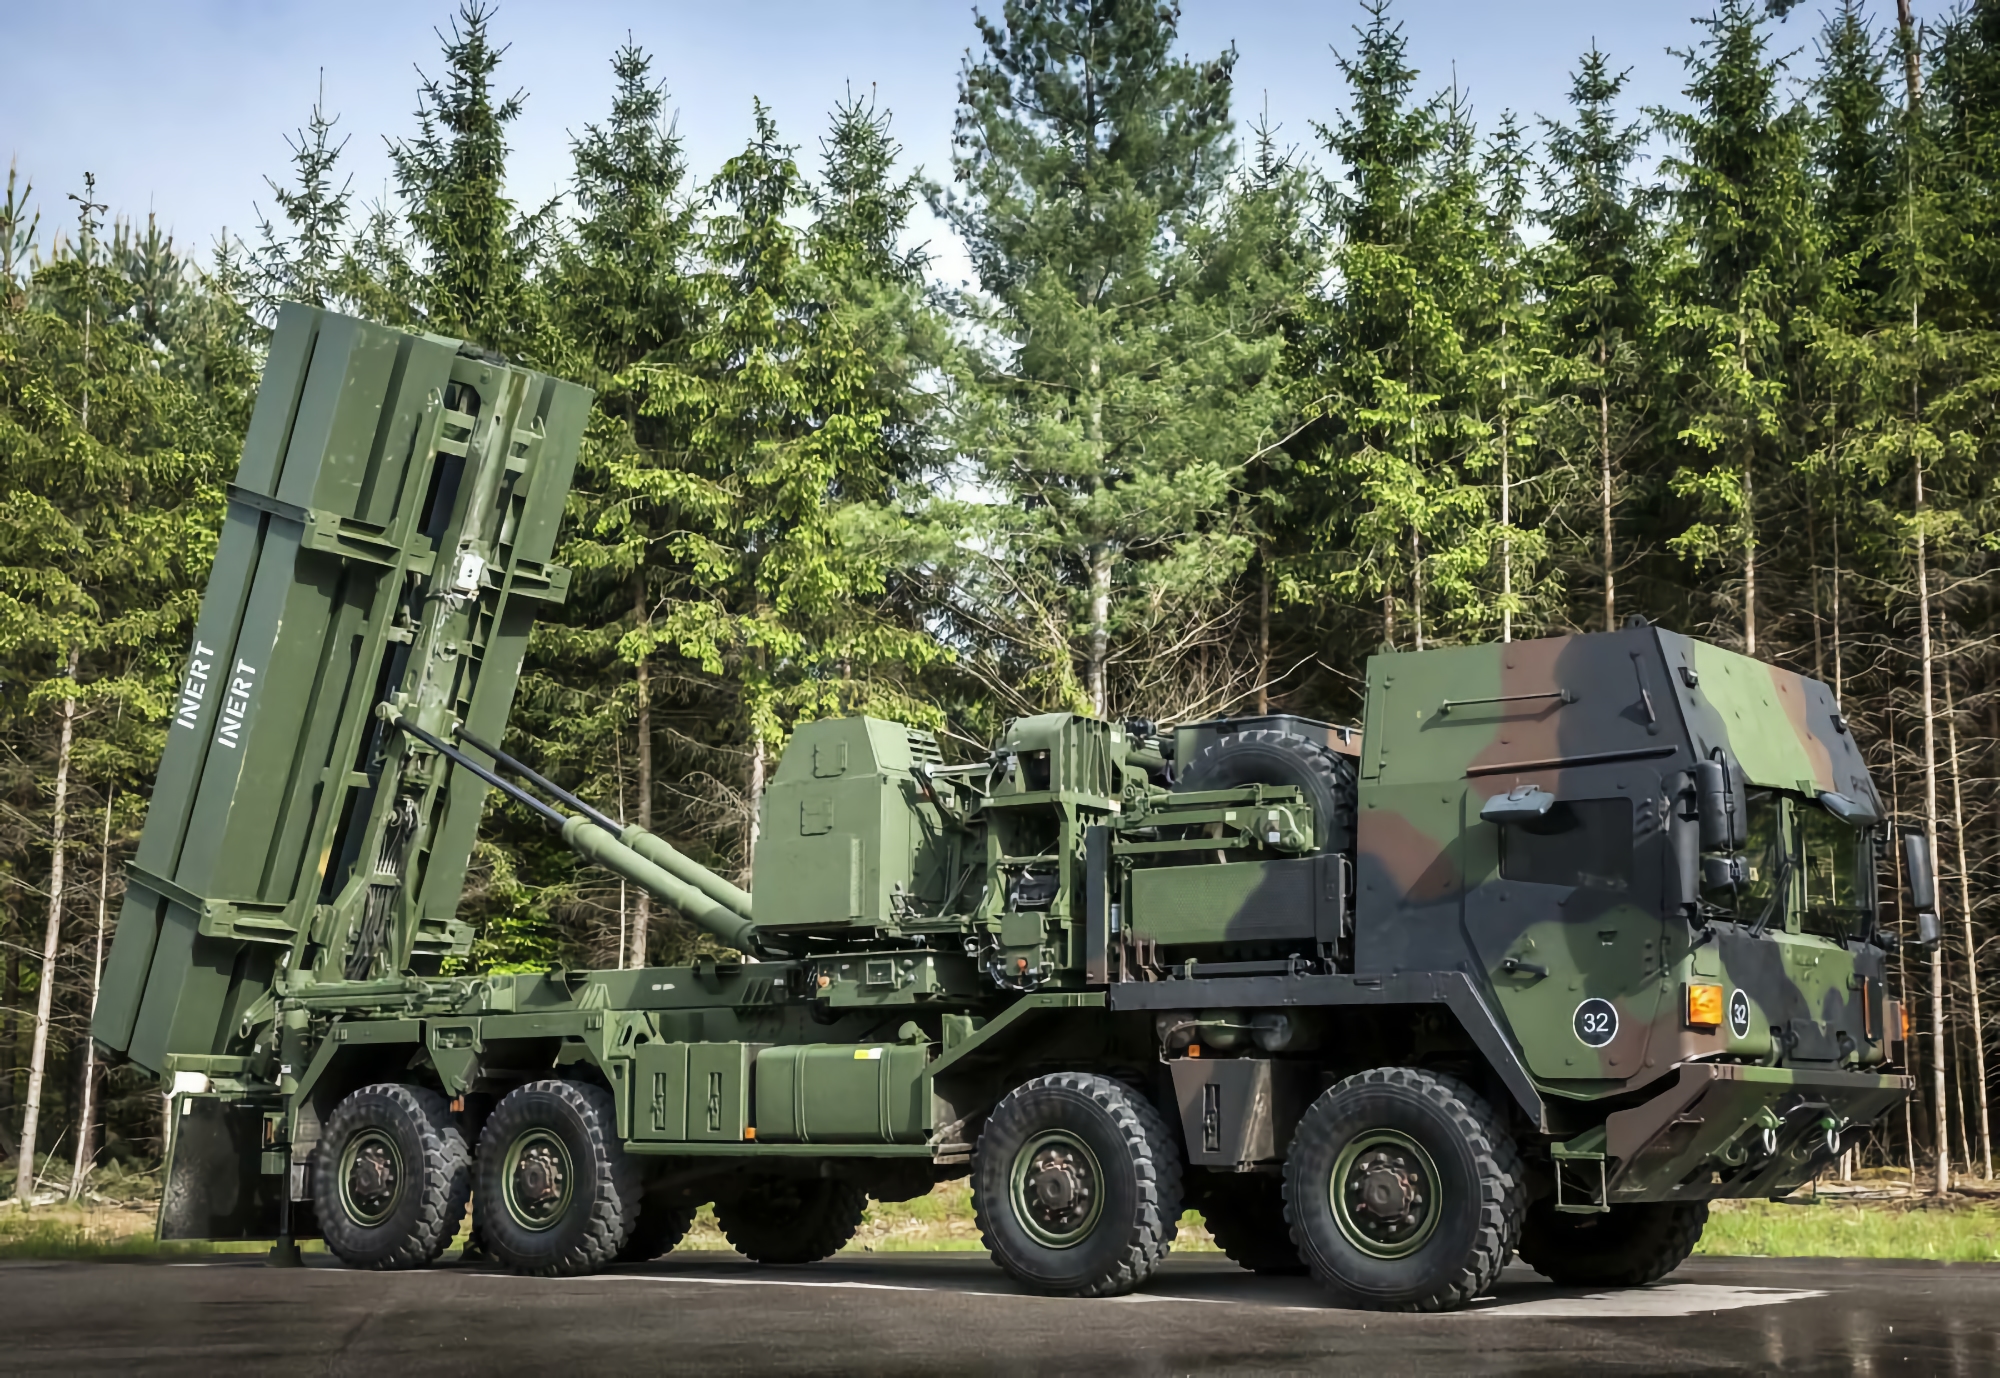 Not just HIMARS: Ukraine received an advanced IRIS-T air defense system, costing 140,000,000 euros